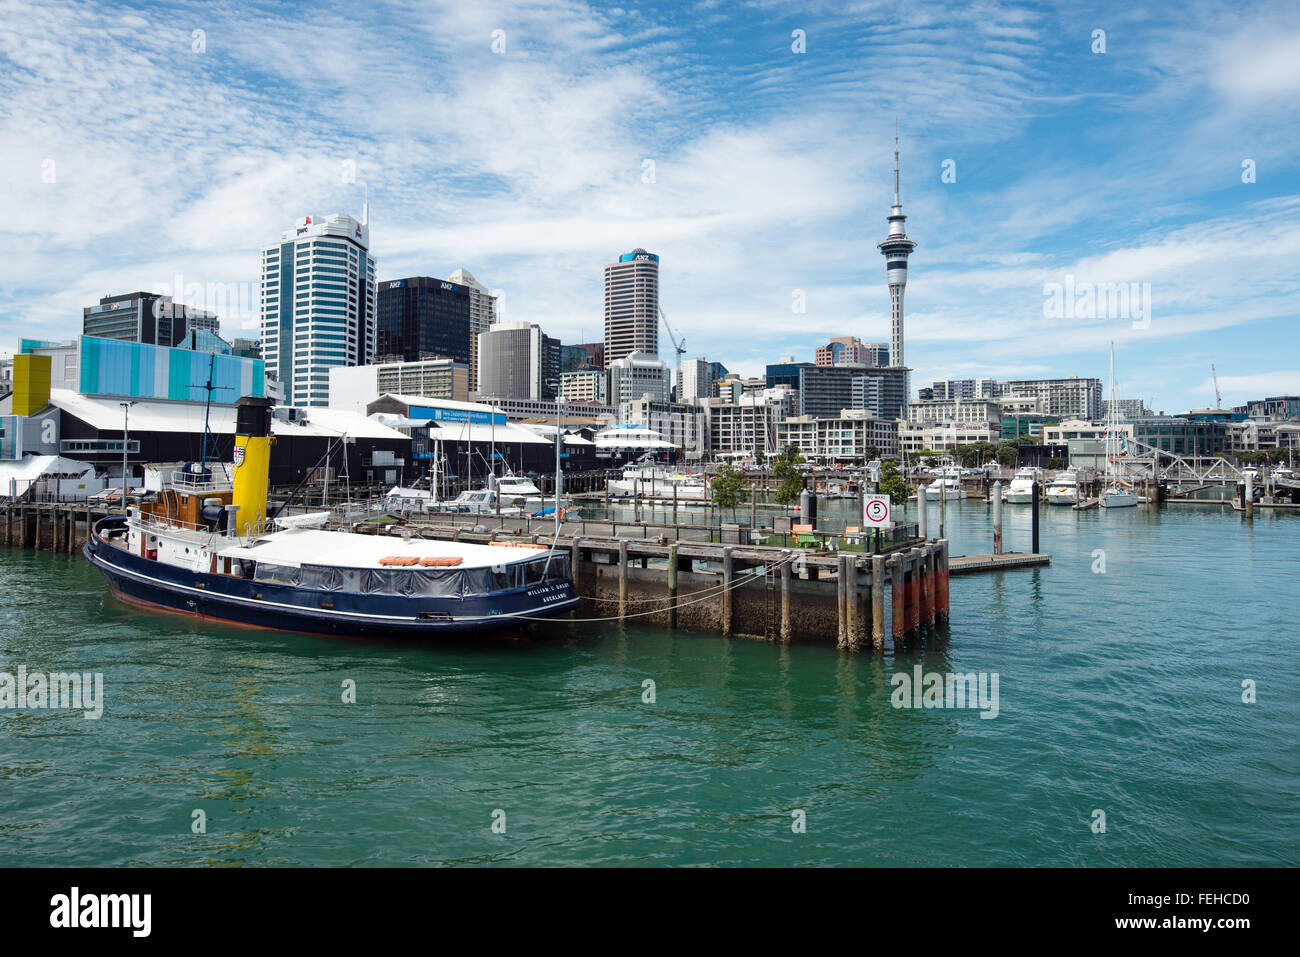 AUCKLAND, NEW ZEALAND - NOV 8 2015: View of Auckland city skyline from Ports of Auckland Stock Photo